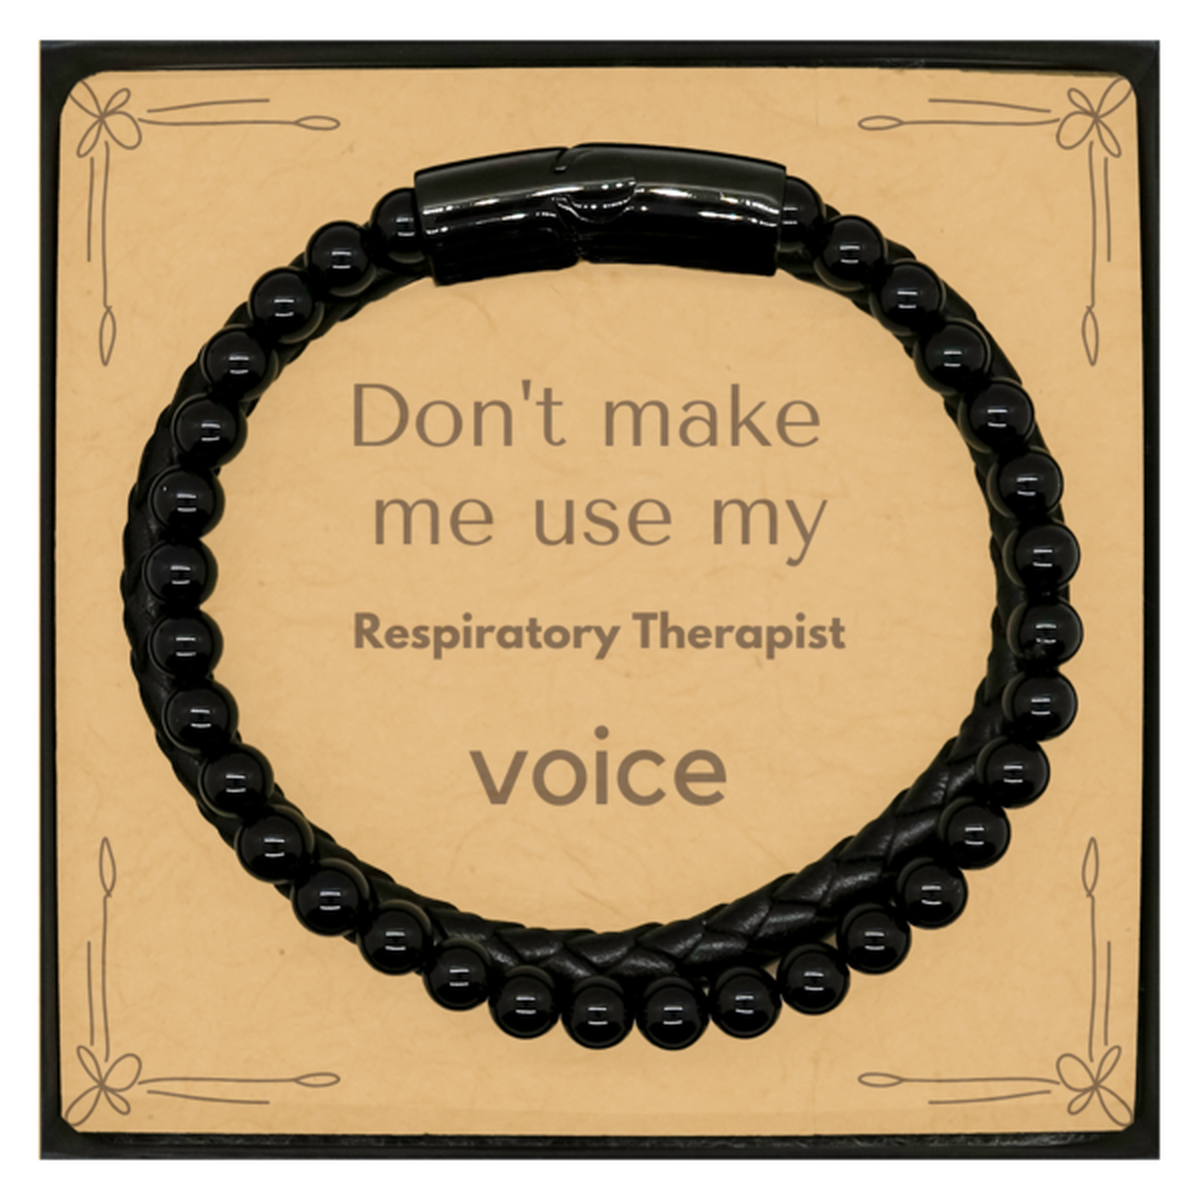 Don't make me use my Respiratory Therapist voice, Sarcasm Respiratory Therapist Card Gifts, Christmas Respiratory Therapist Stone Leather Bracelets Birthday Unique Gifts For Respiratory Therapist Coworkers, Men, Women, Colleague, Friends